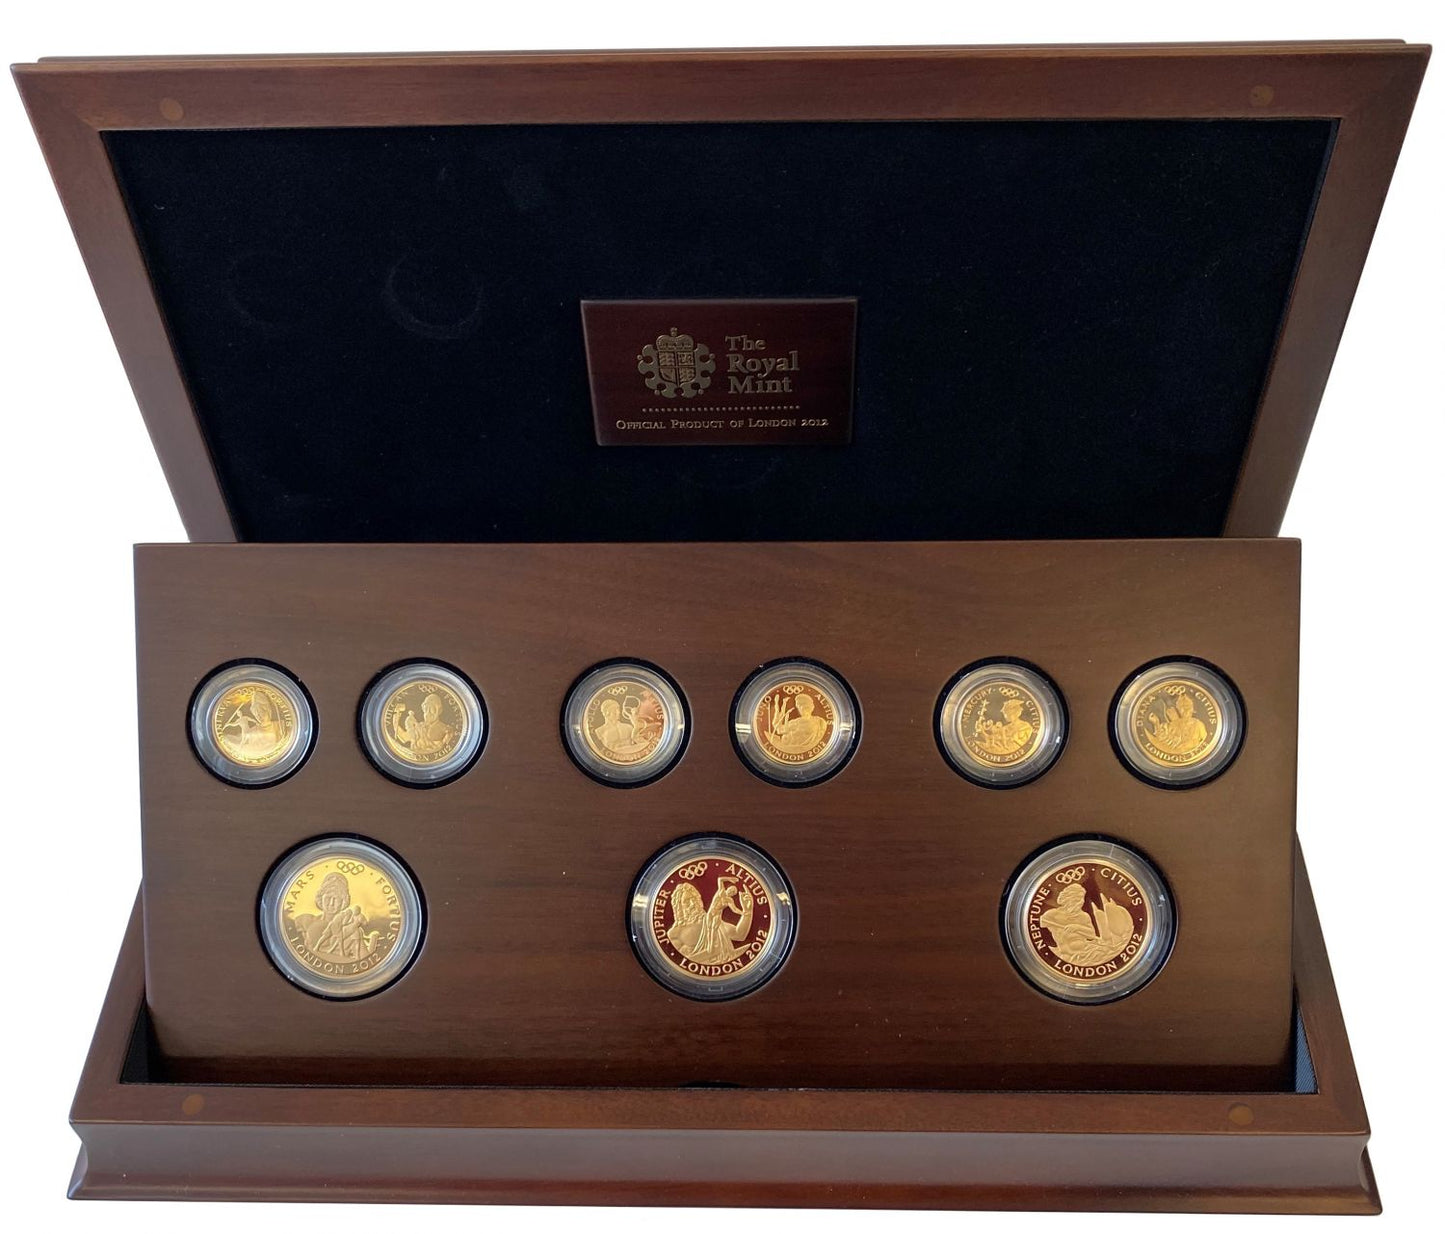 Elizabeth II 2012 Olympic 9-coin gold proof Set - Higher, Faster, Stronger